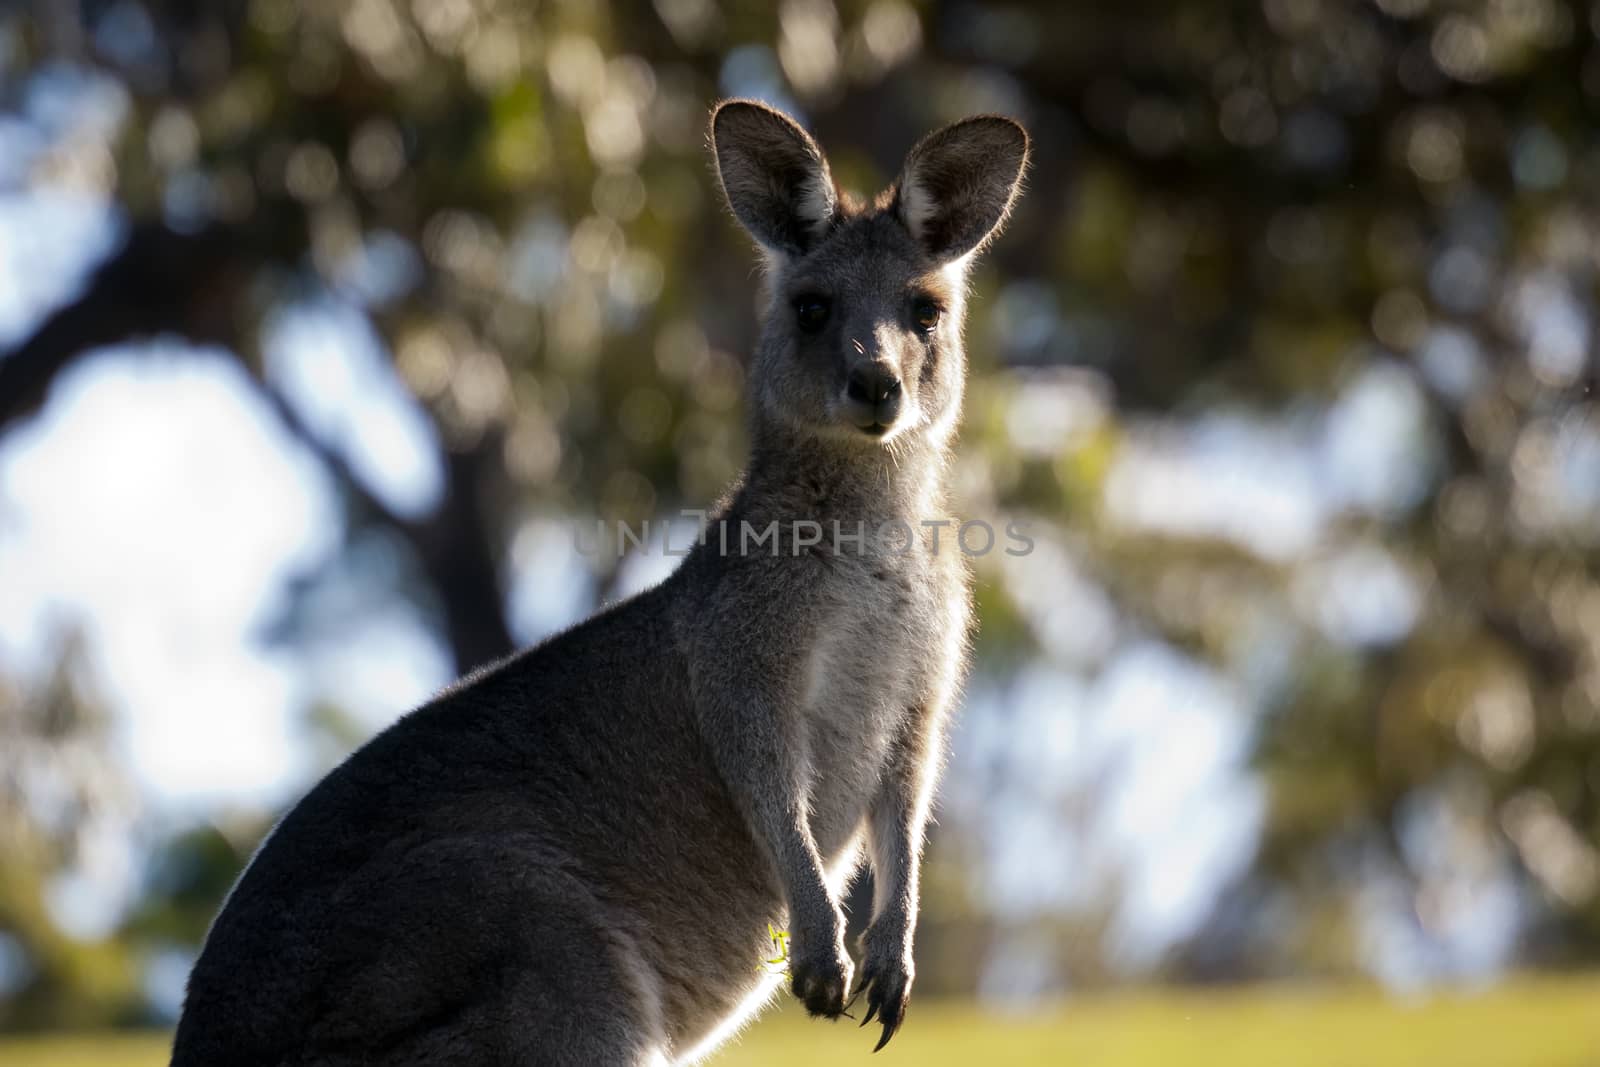 Kangaroo standing in the sun with blurred background of trees